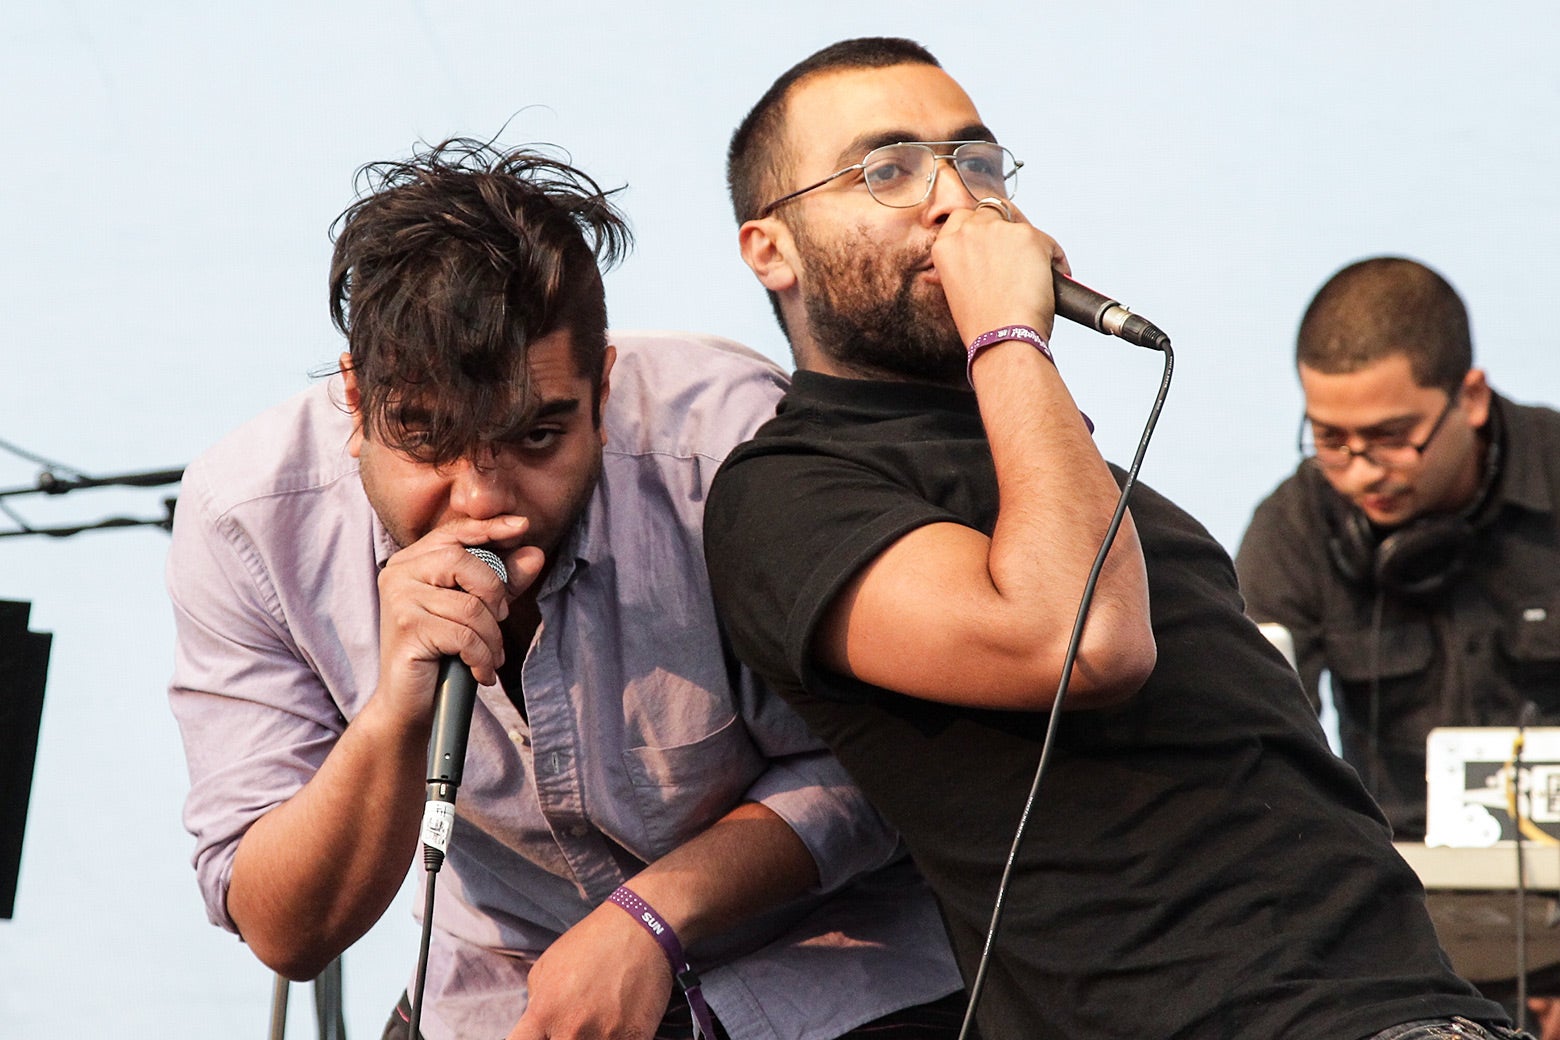 The two rappers lean on each other holding microphones on stage outdoors. 